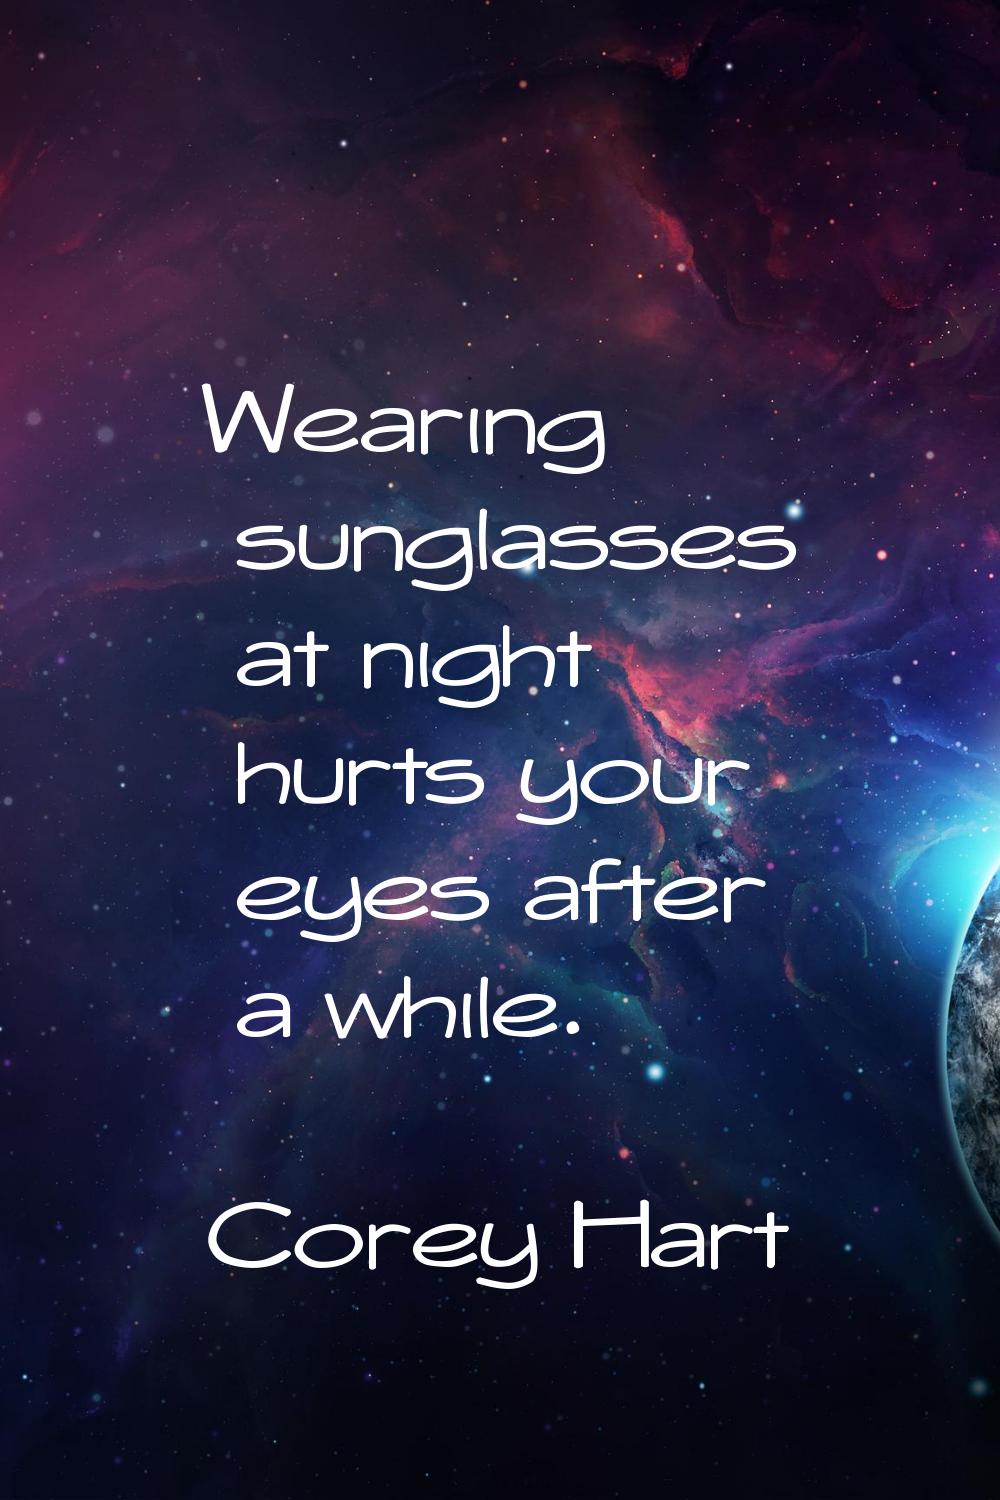 Wearing sunglasses at night hurts your eyes after a while.